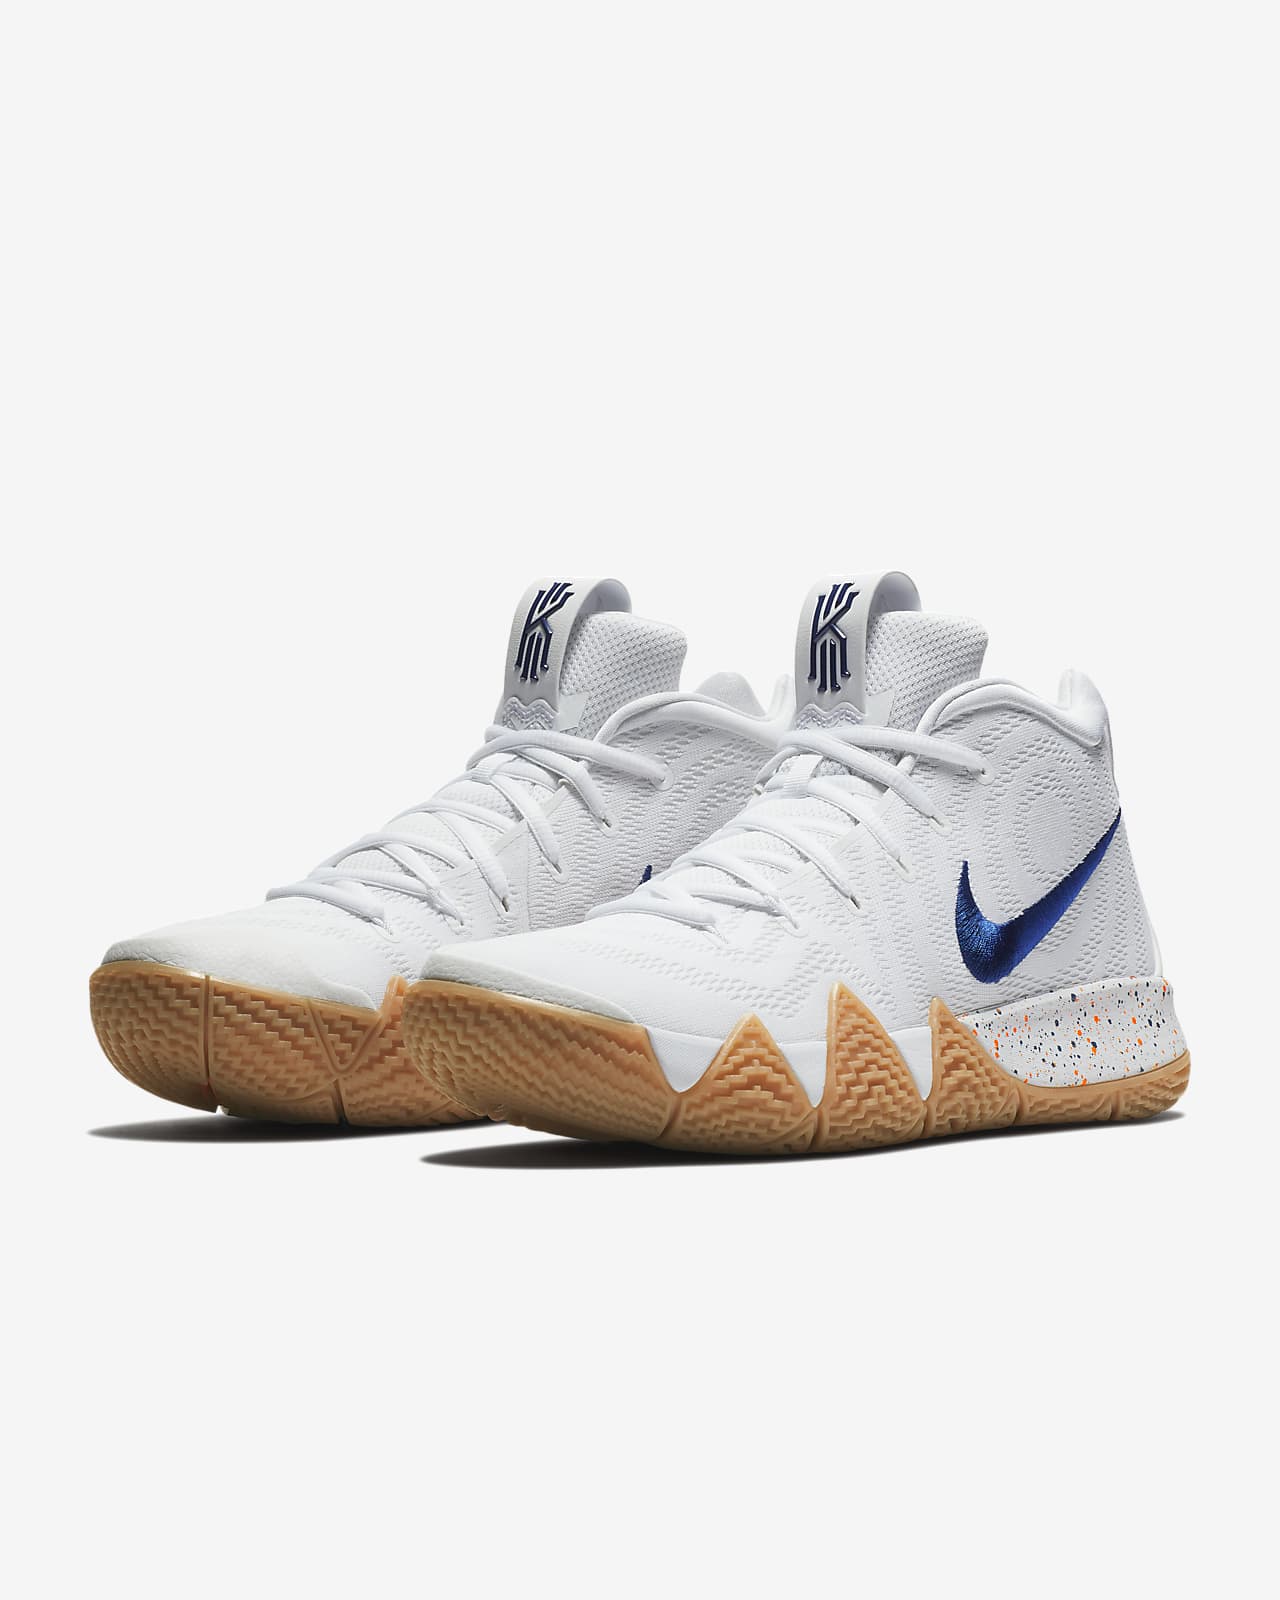 kyrie 4 uncle drew canada